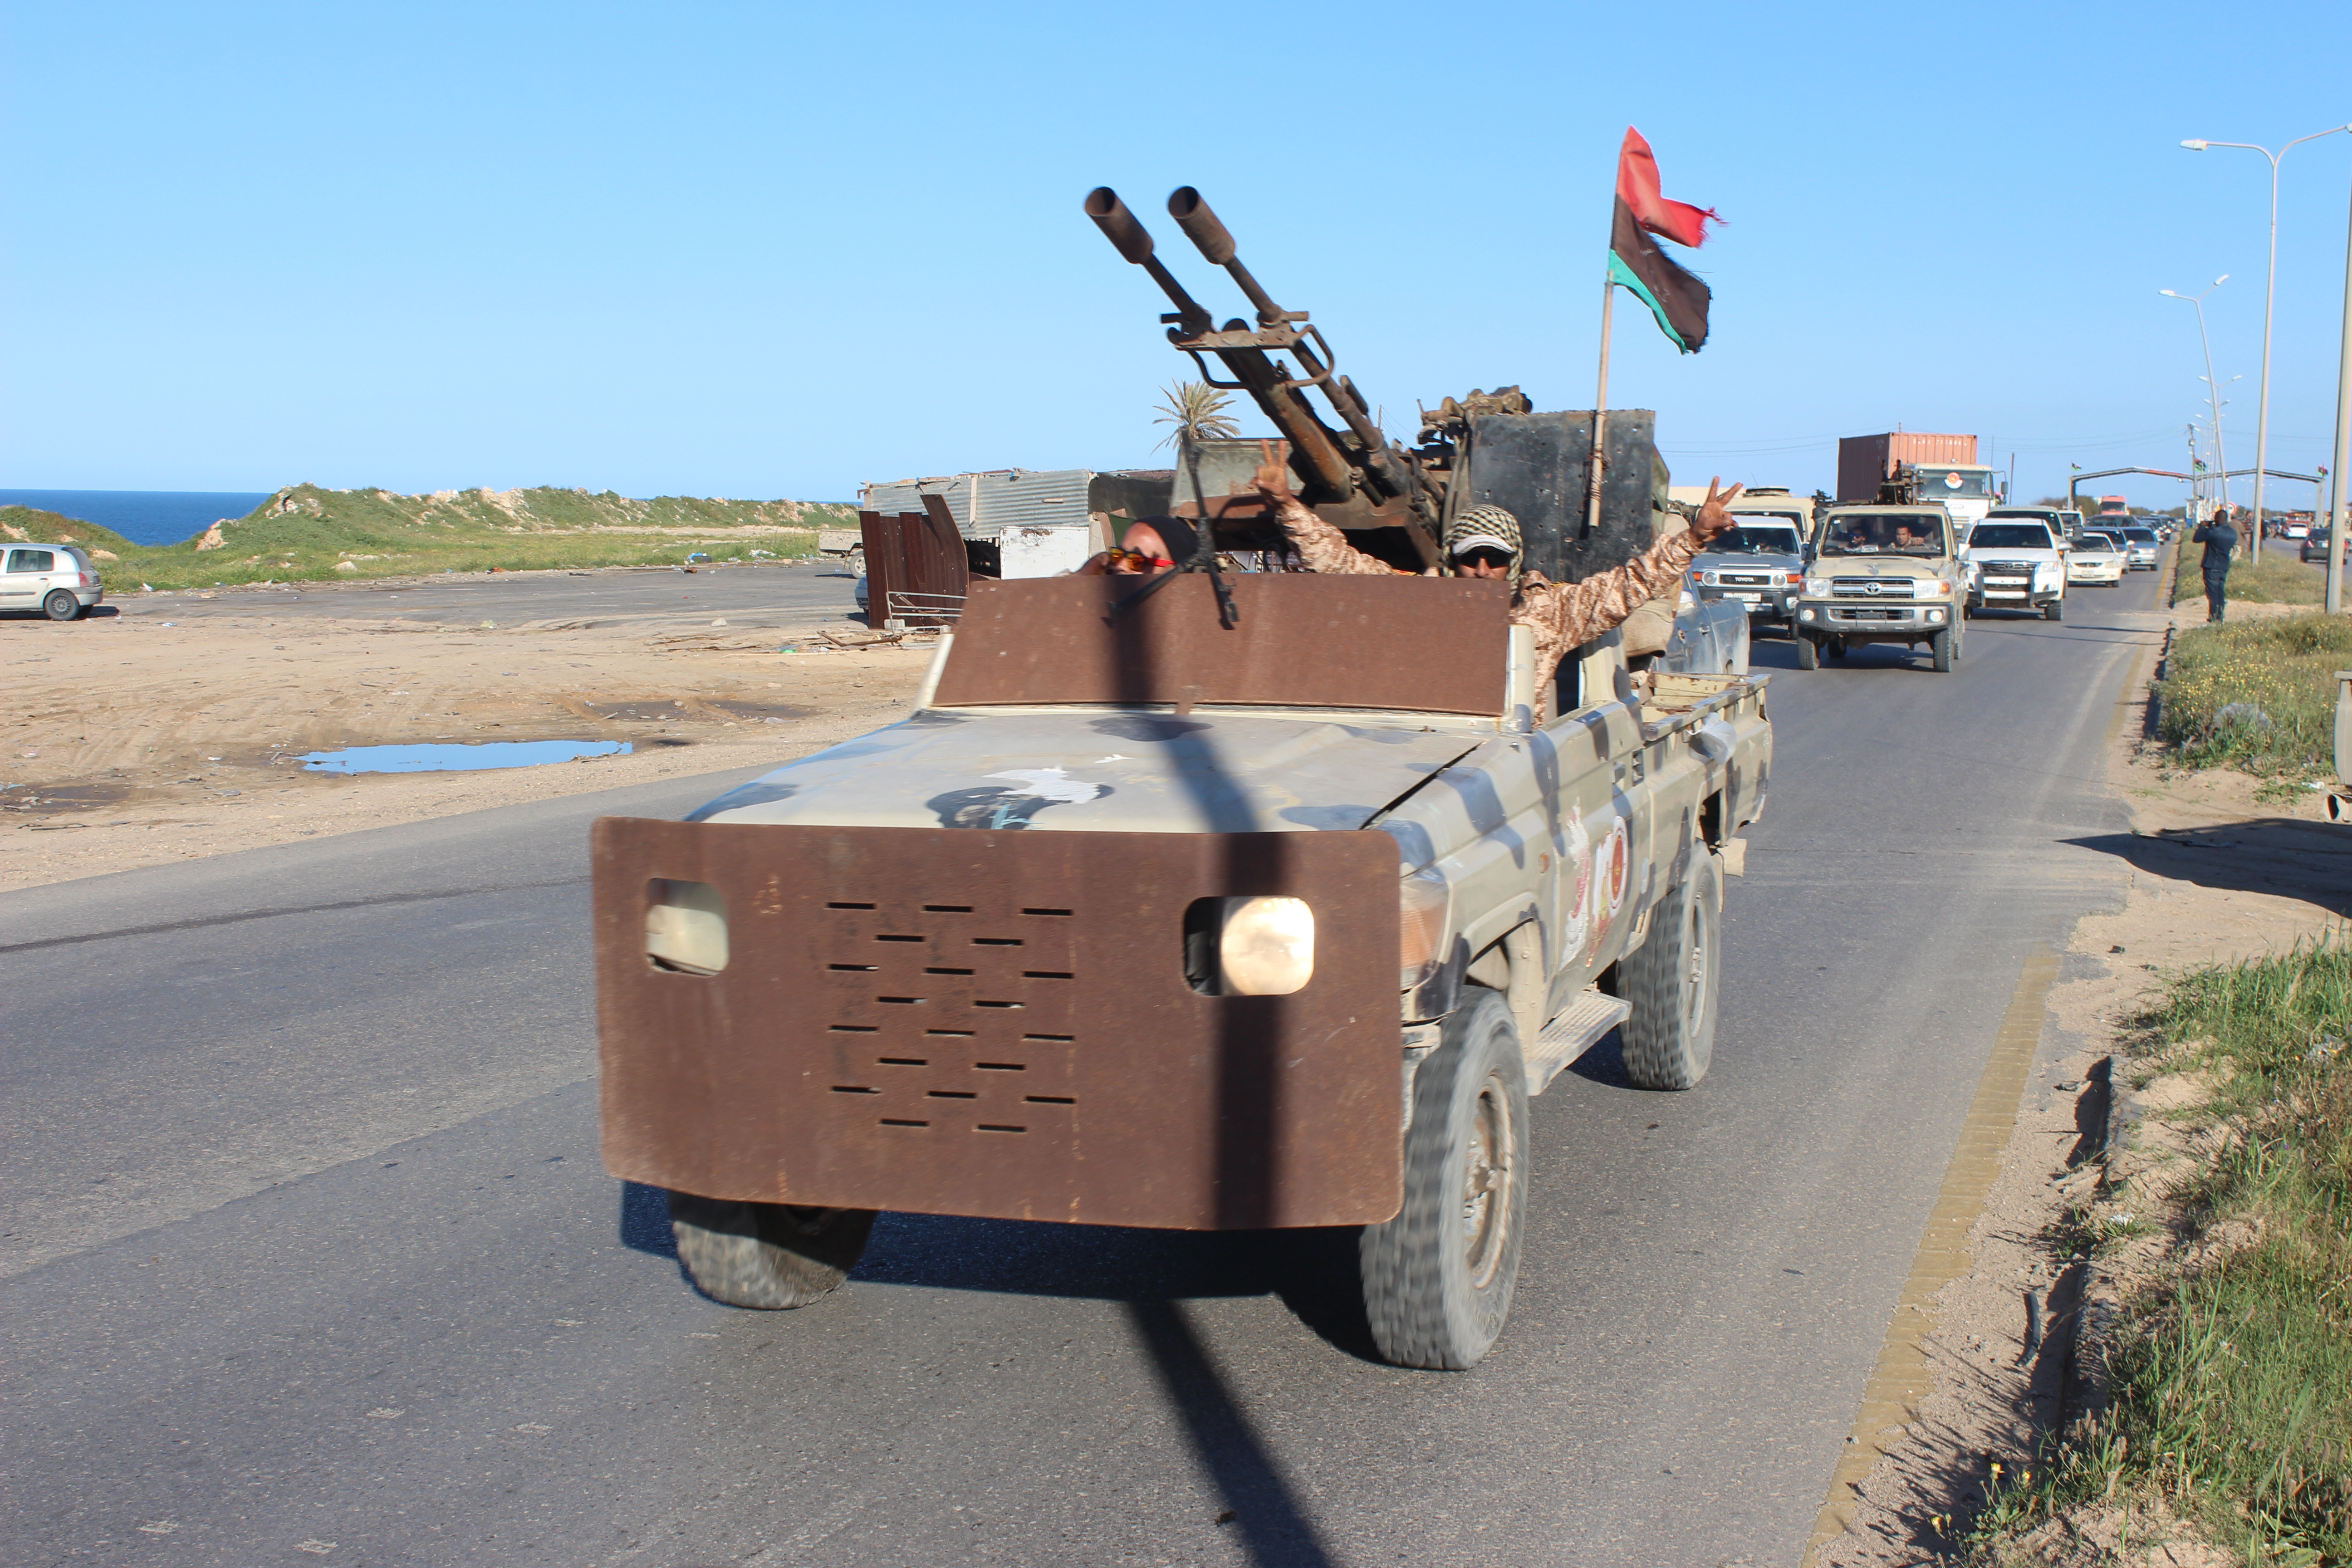 epa07489300 Vehicles and militants, reportedly from the Misrata militia, gathering to join Tripoli forces, in Tripoli, Libya, 06 April 2019. According to reports, commander of the Libyan National Army (LNA) Khalifa Haftar ordered Libyan forces loyal to him to take the capital Tripoli, held by a UN-backed unity government, sparking fears of further escalation in the country.  c